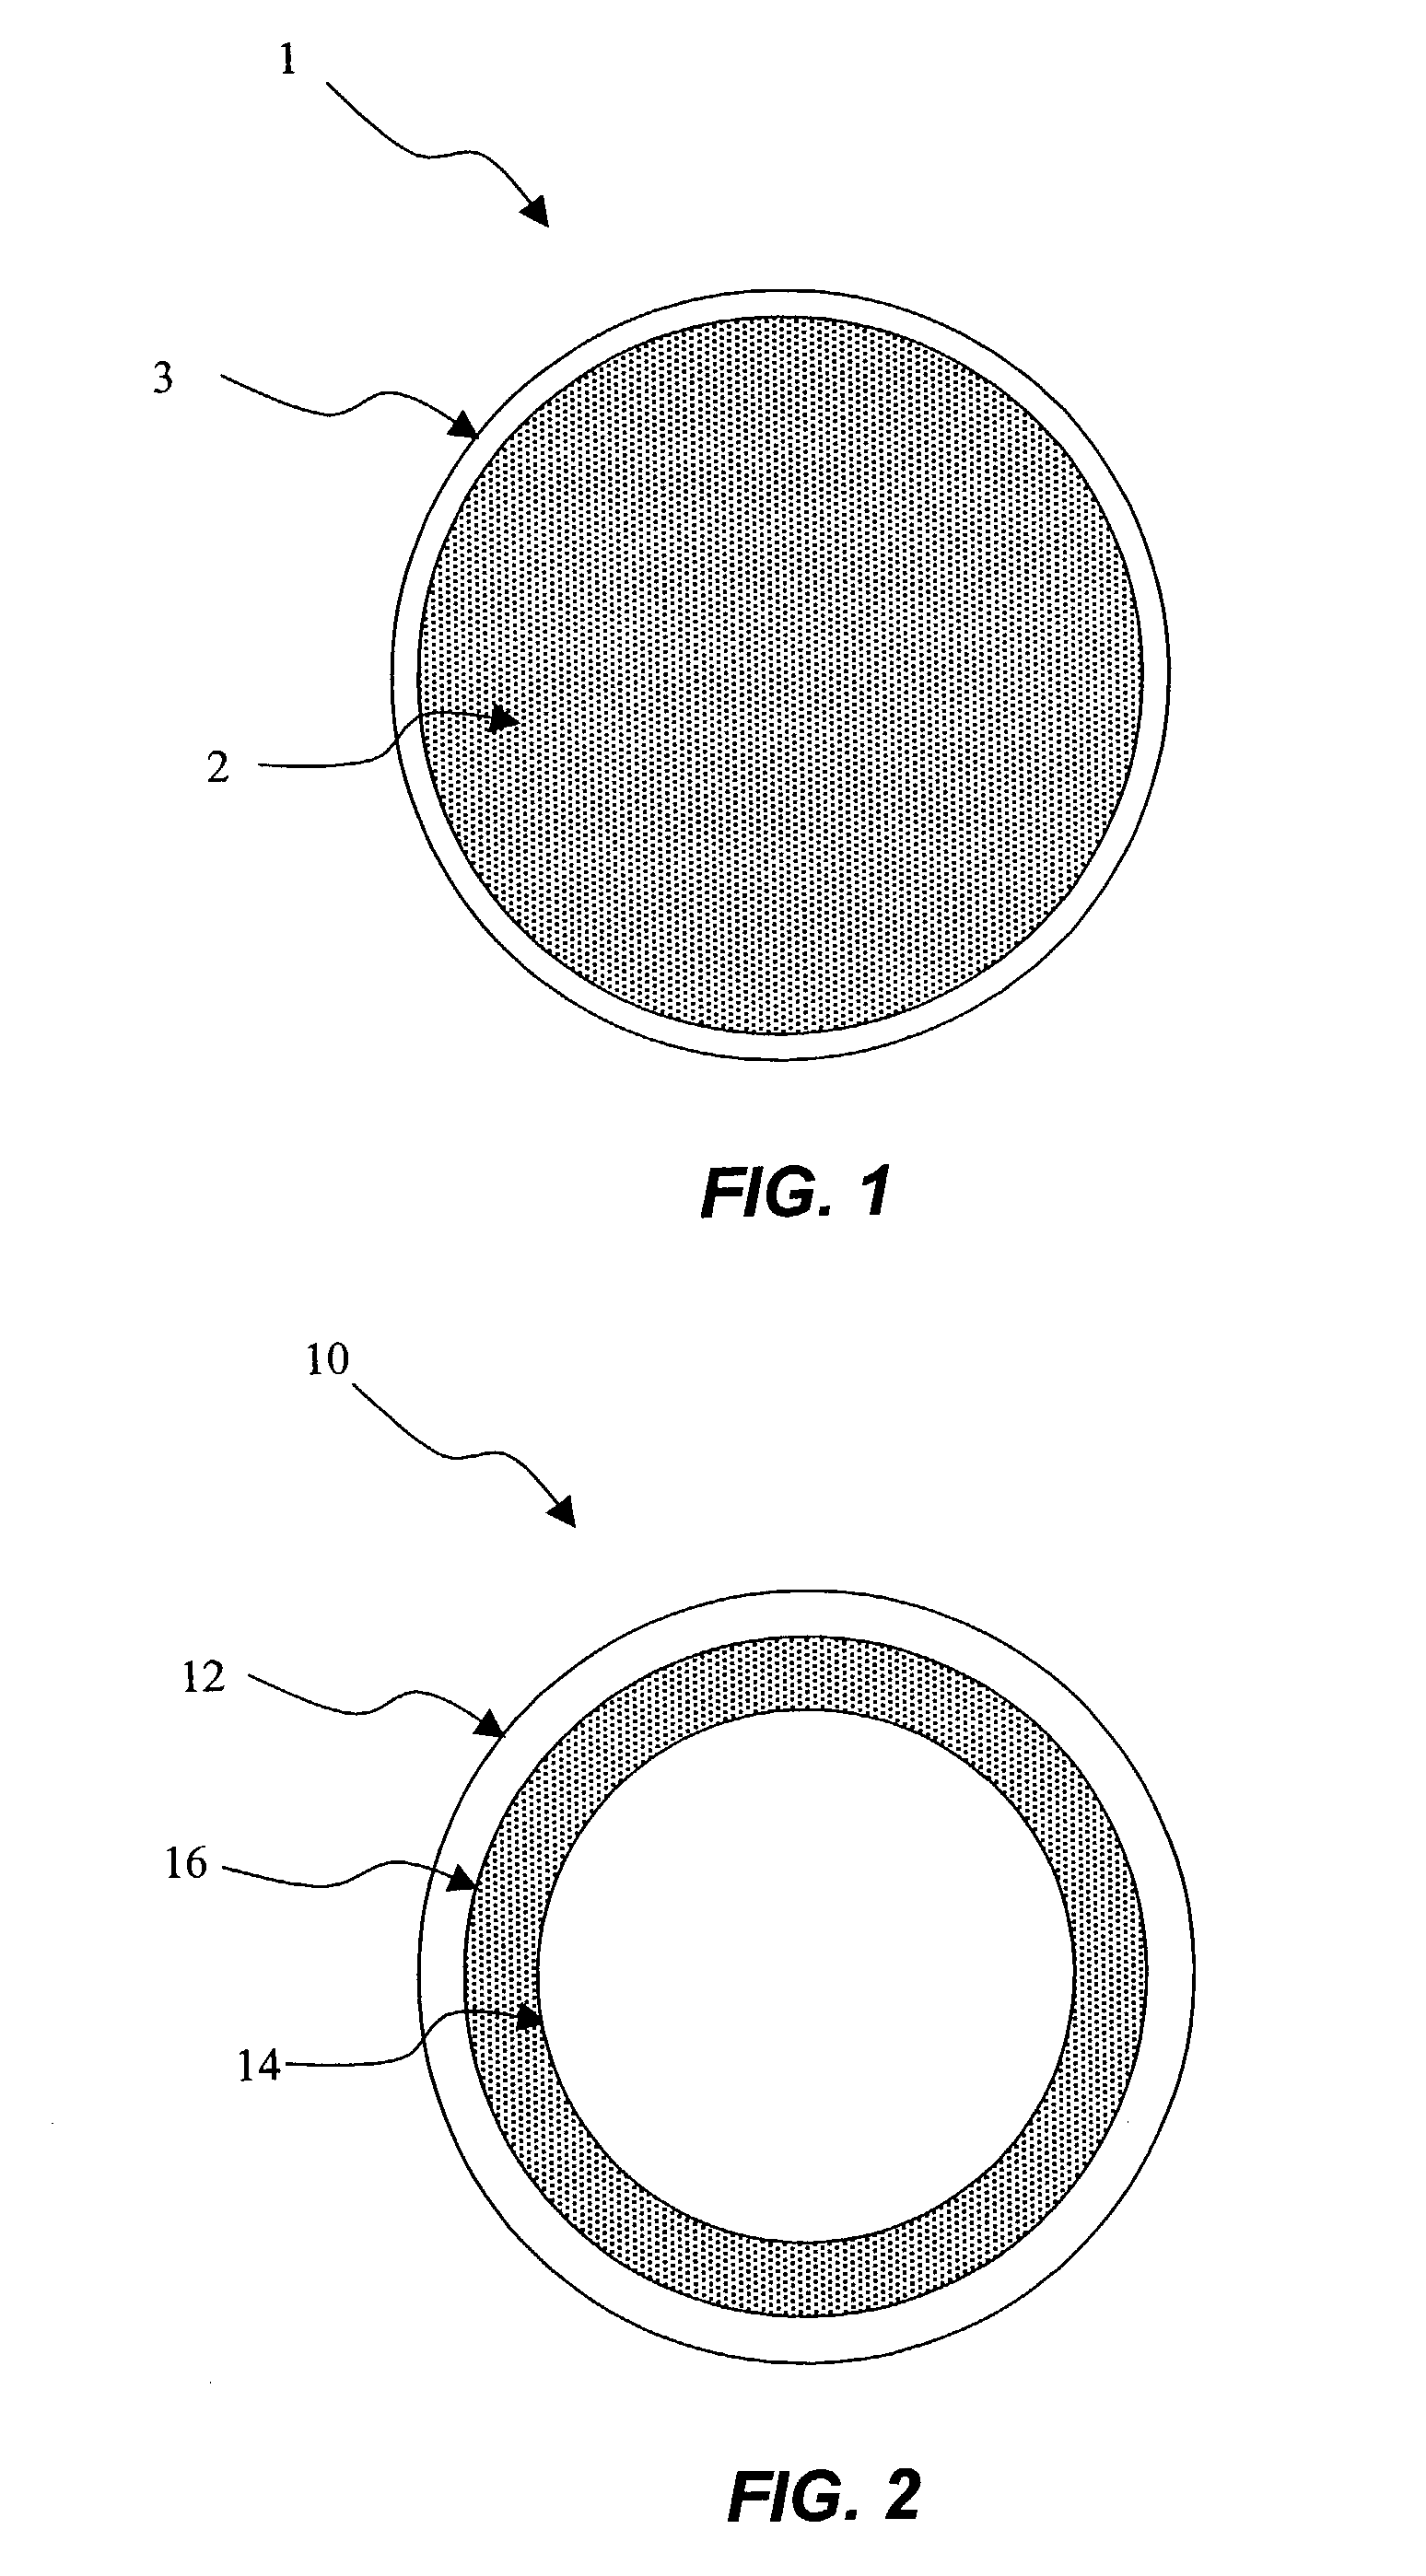 Highly neutralized polymer golf ball compositions including oxa acids and methods of making same